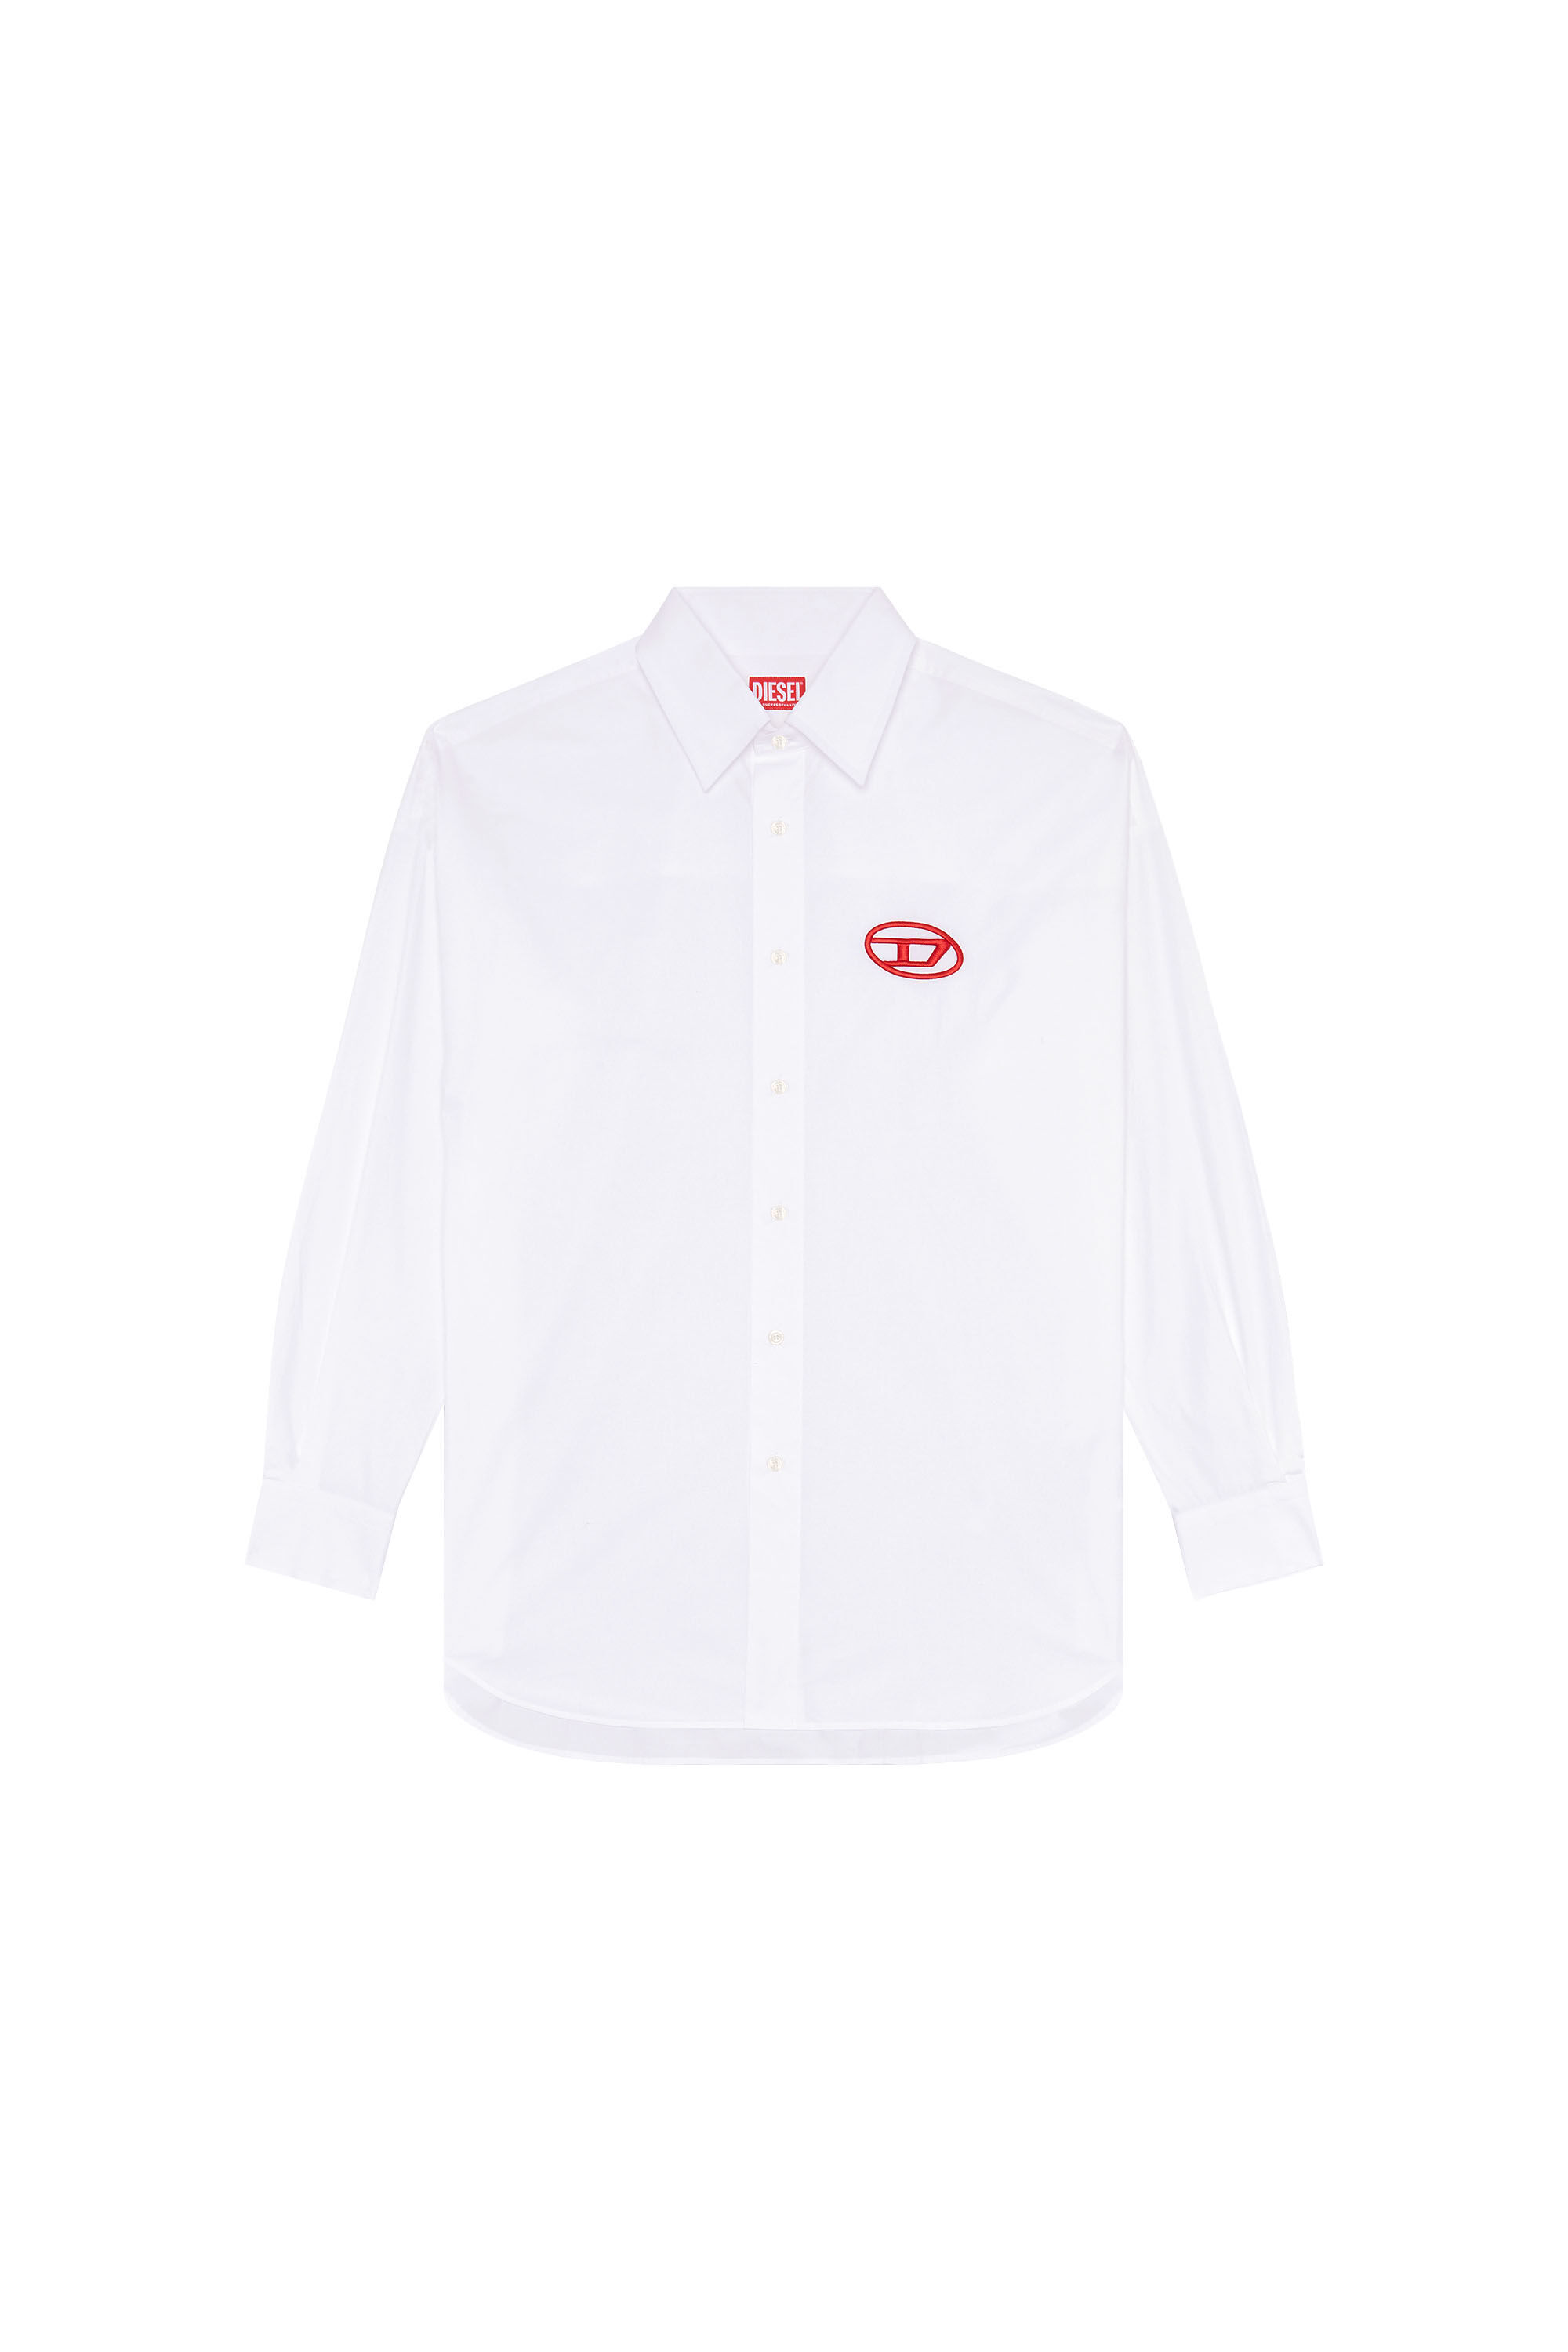 Diesel - S-DOU-PLAIN, Man Poplin shirt with oval D embroidery in White - Image 2